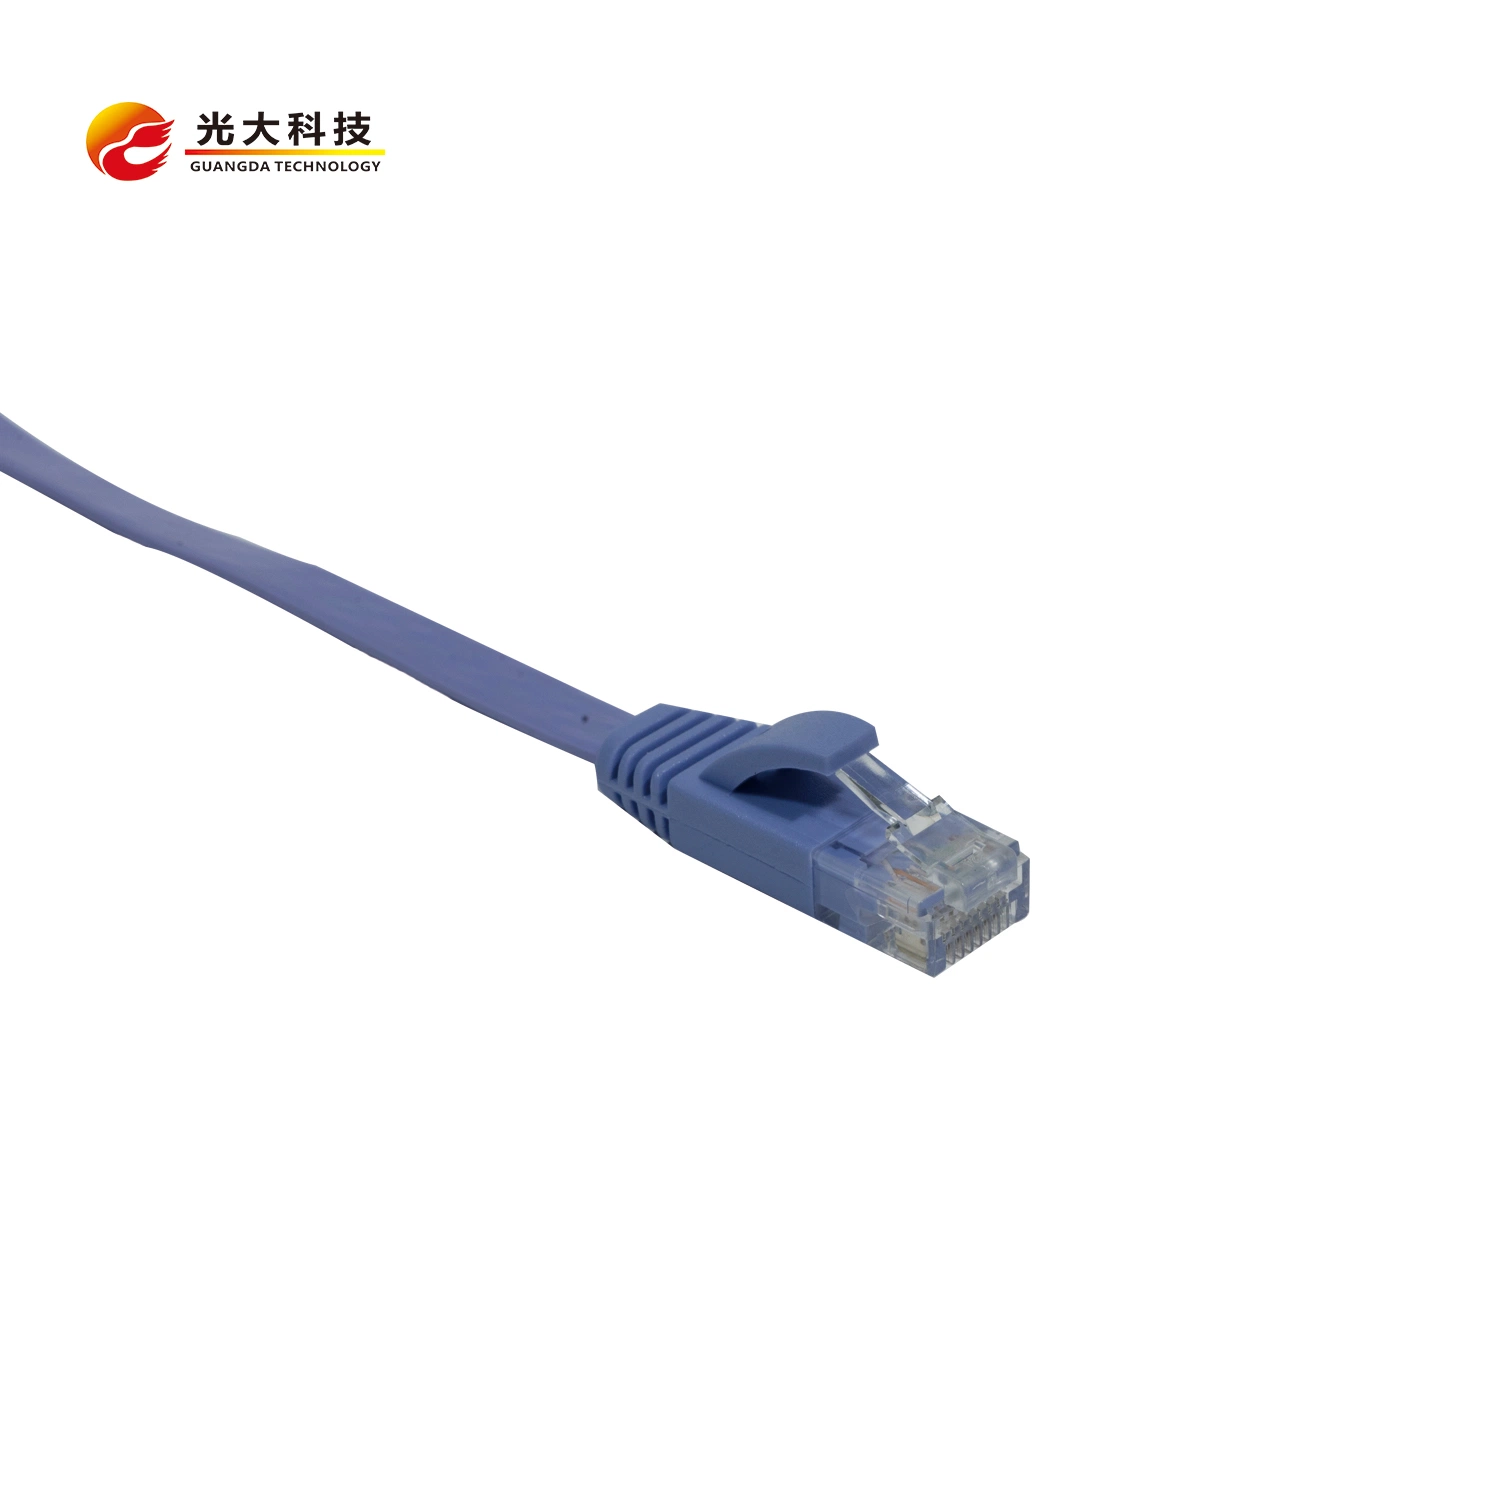 UTP/FTP/SFTP High Quality High Speed Customized Cat5 Solid Bare Copper Cable for Ethernet Network LAN Cable ETL/UL/Cmx/Cm/Cmr/CMP Approved